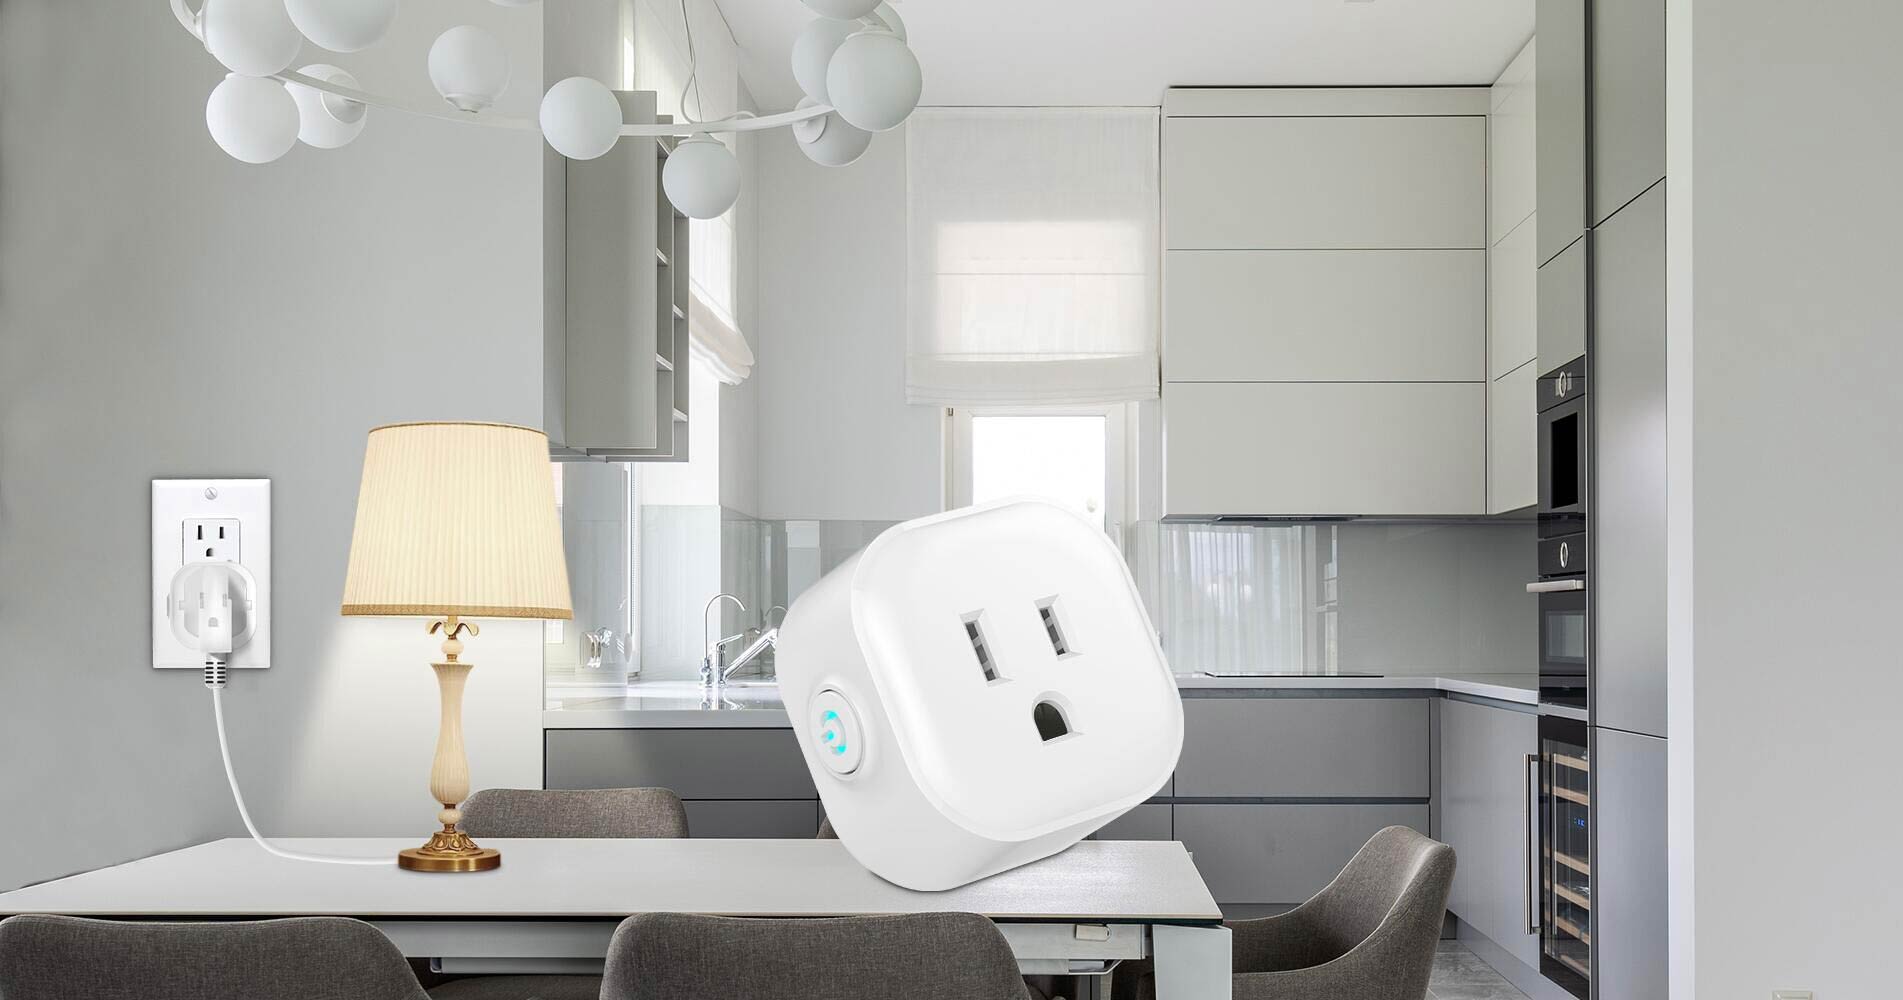 Solve the problem that the smart plug can't connect to wifi